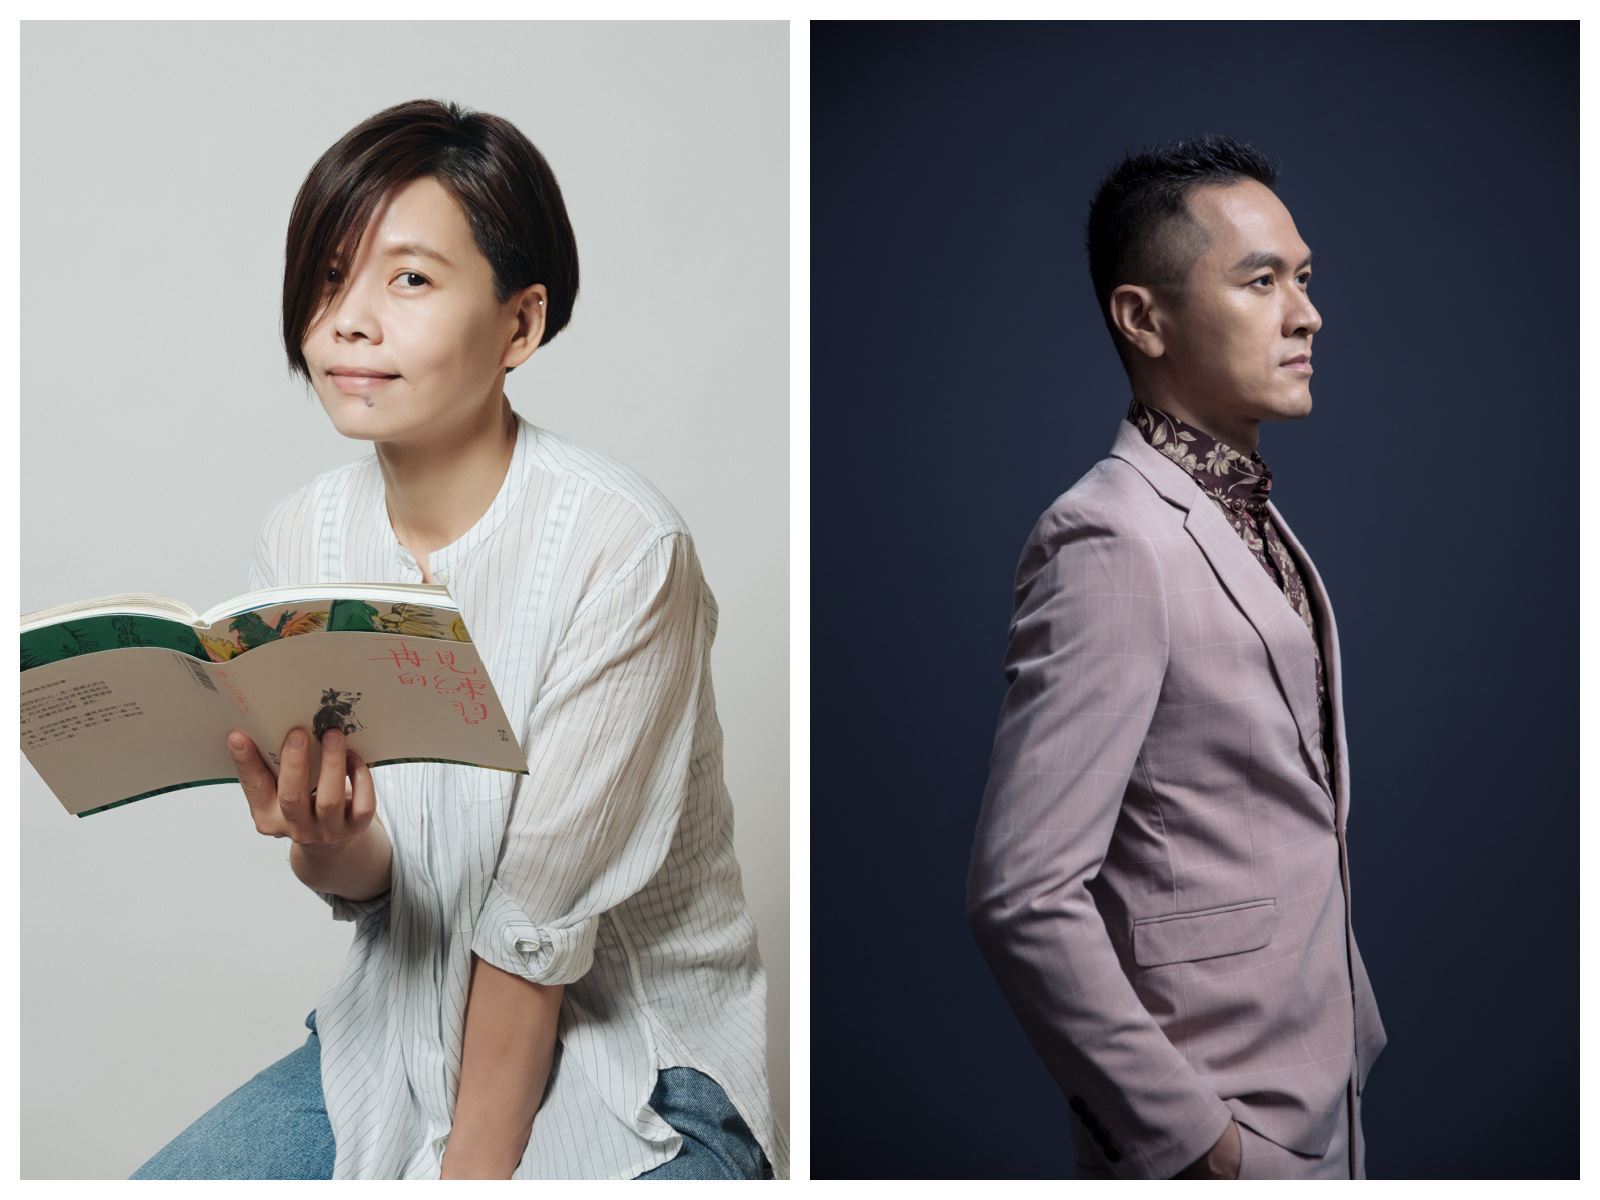 Taiwanese illustrator Bei Lynn, author Kevin Chen to be featured at Toronto International Festival of Authors